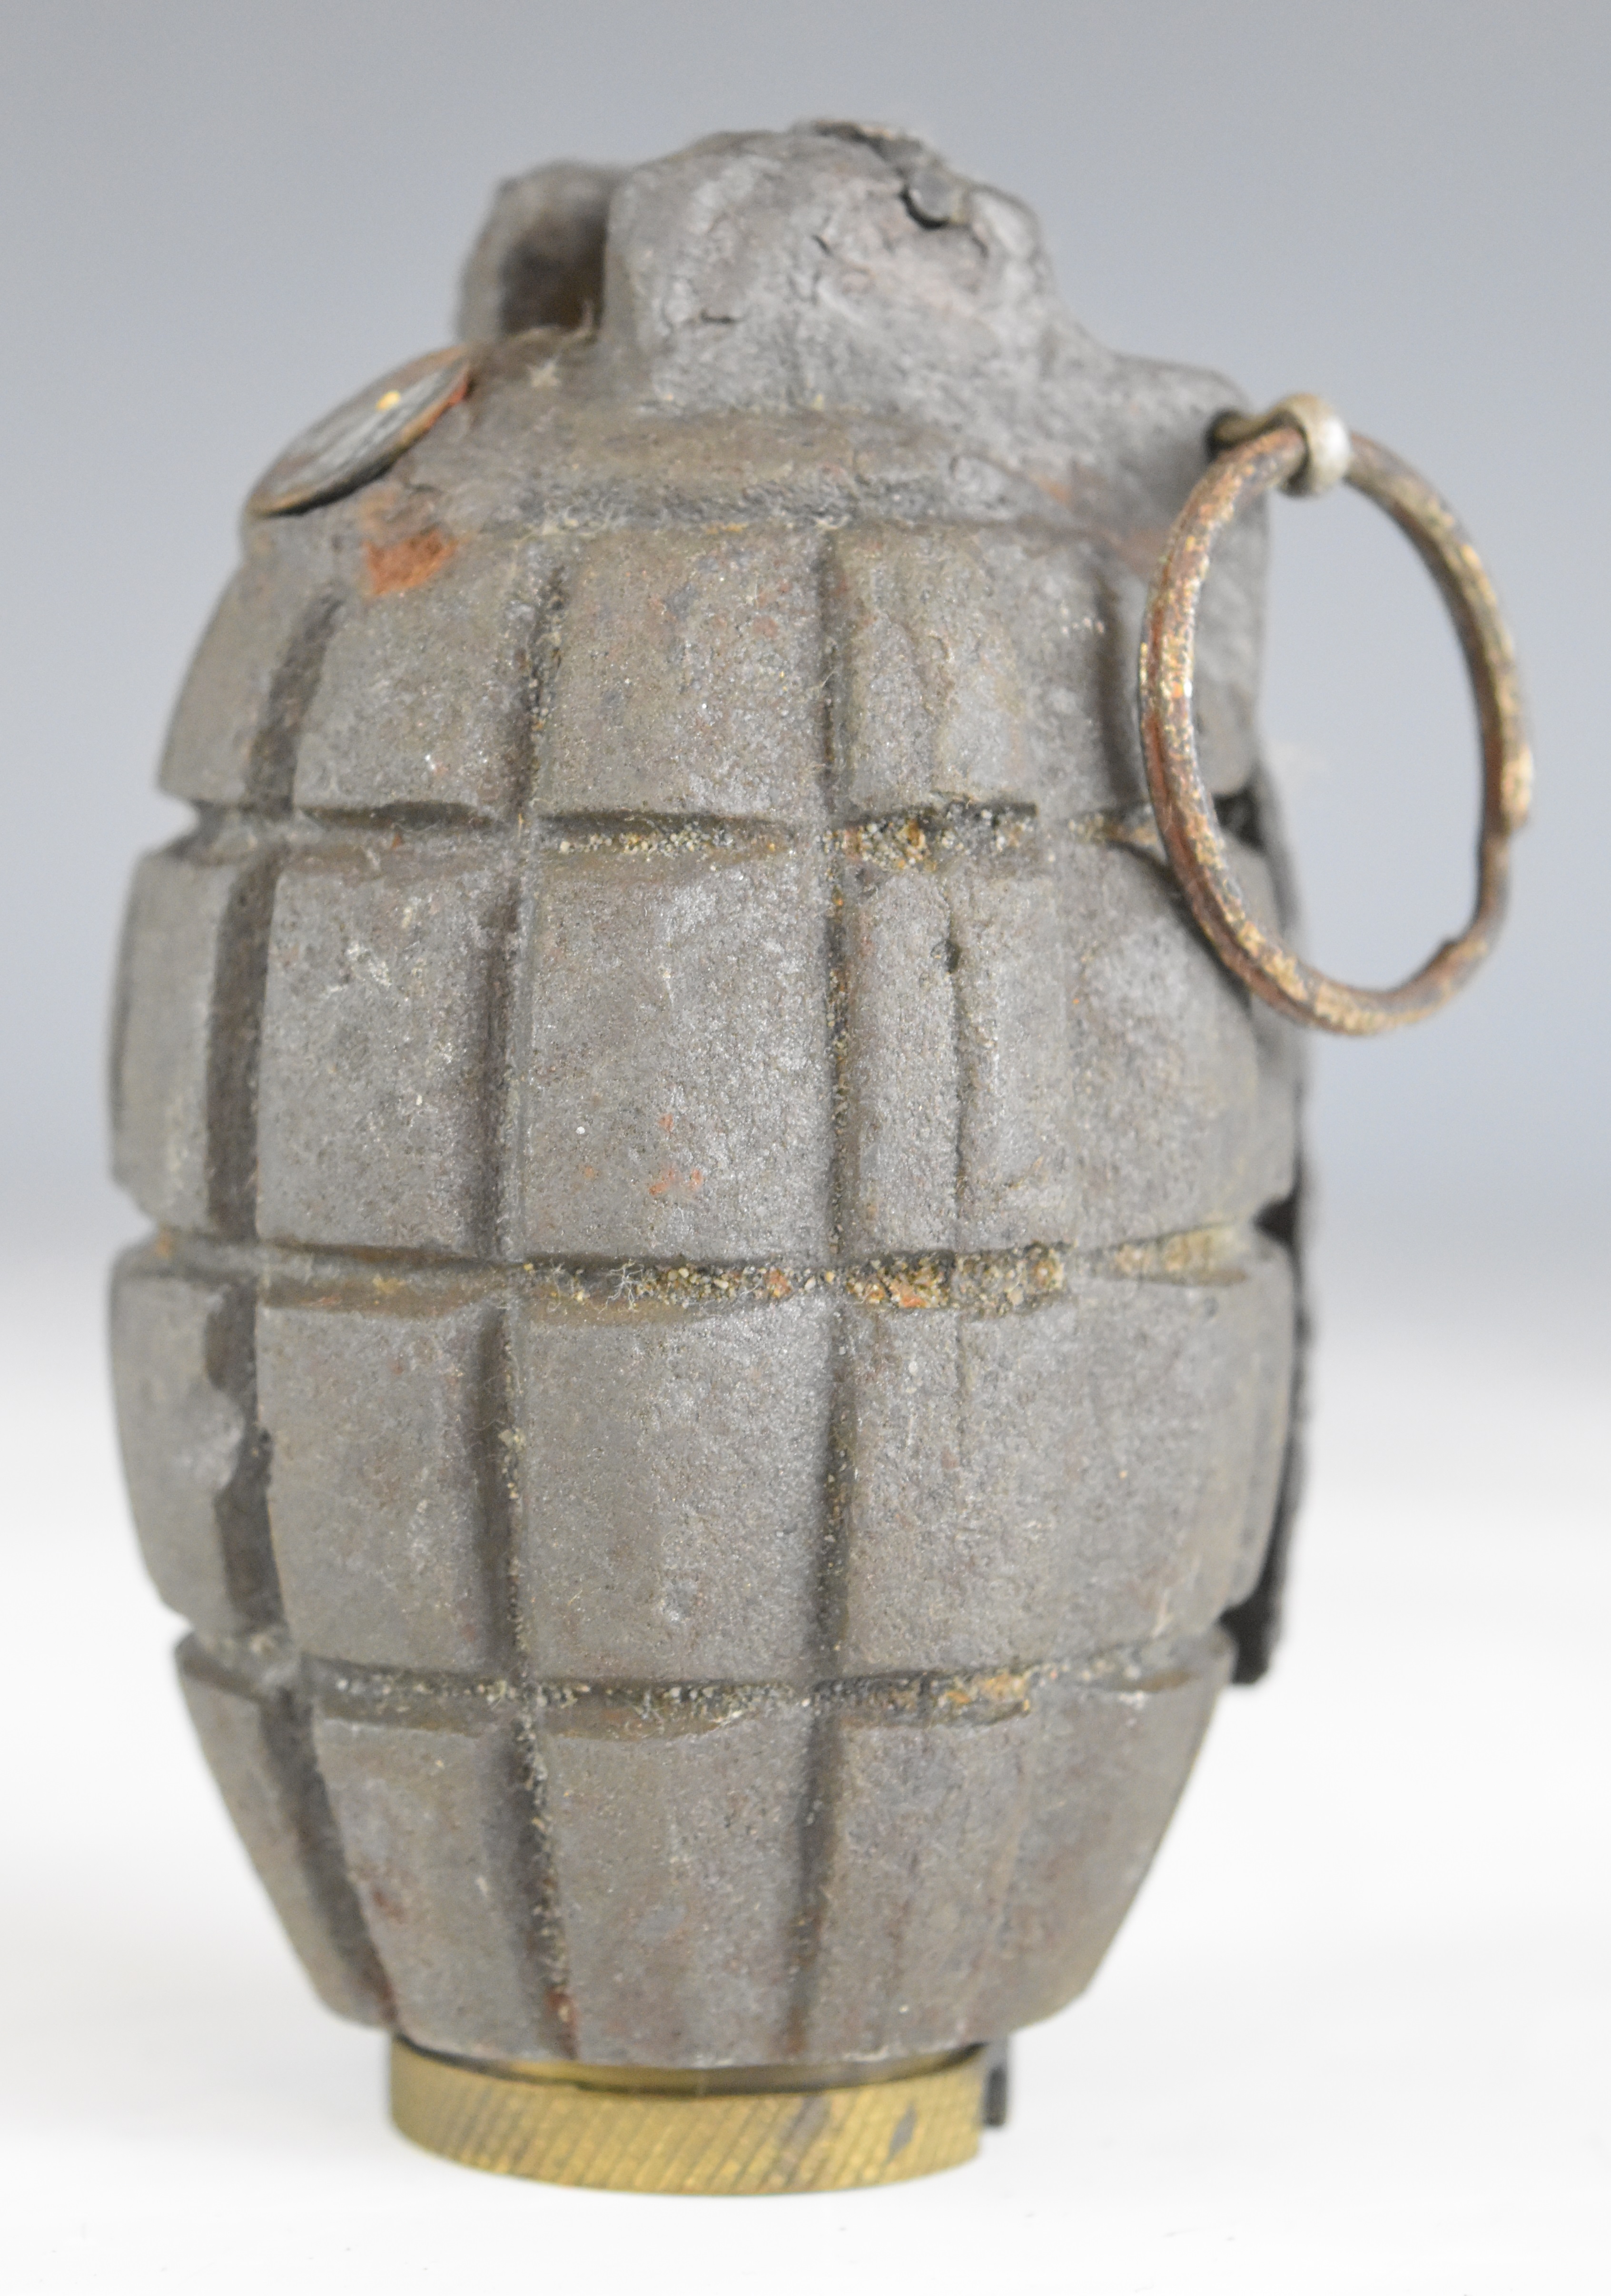 British WW1 inert Mills bomb / grenade No5 Mk I, with 8/16 to screw in brass base - Image 5 of 5